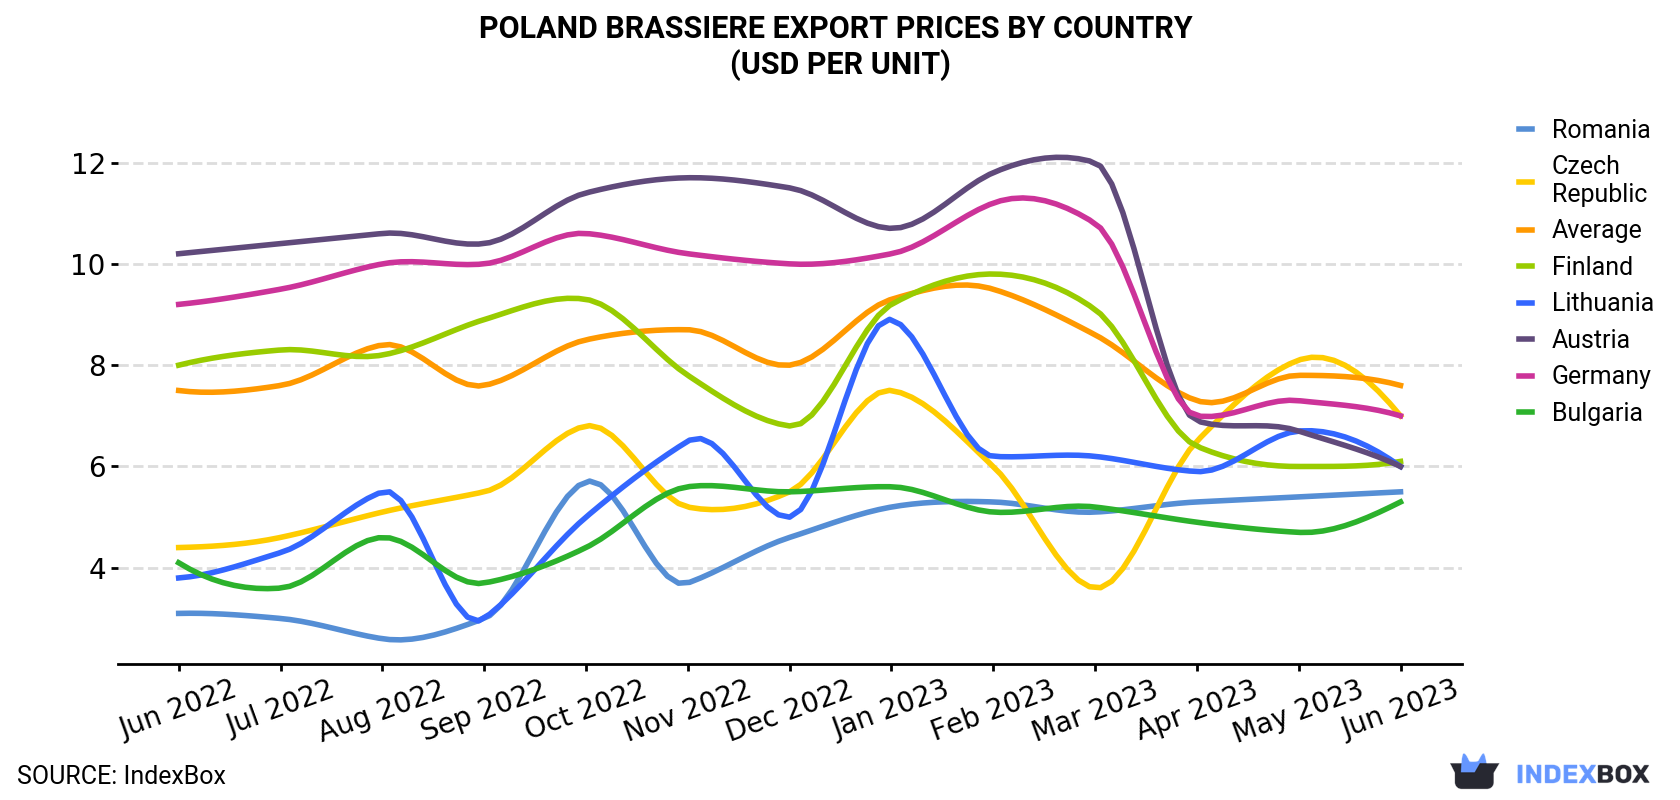 Poland Brassiere Export Prices By Country (USD Per Unit)